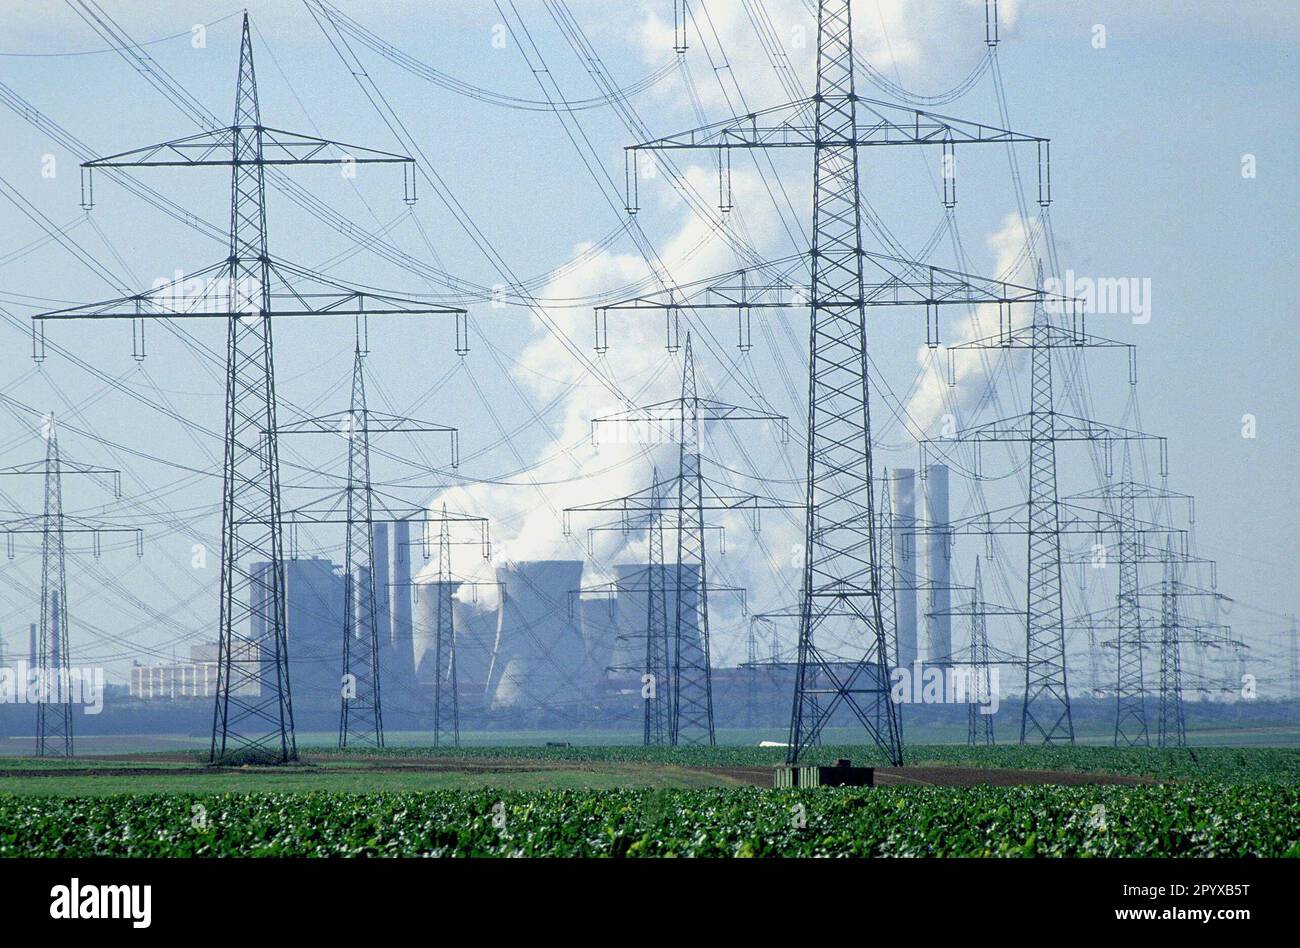 Photo date: 15.05.1995 RWE's Neurath lignite-fired power plant in the Cologne-Aachen Bay area. [automated translation] Stock Photo